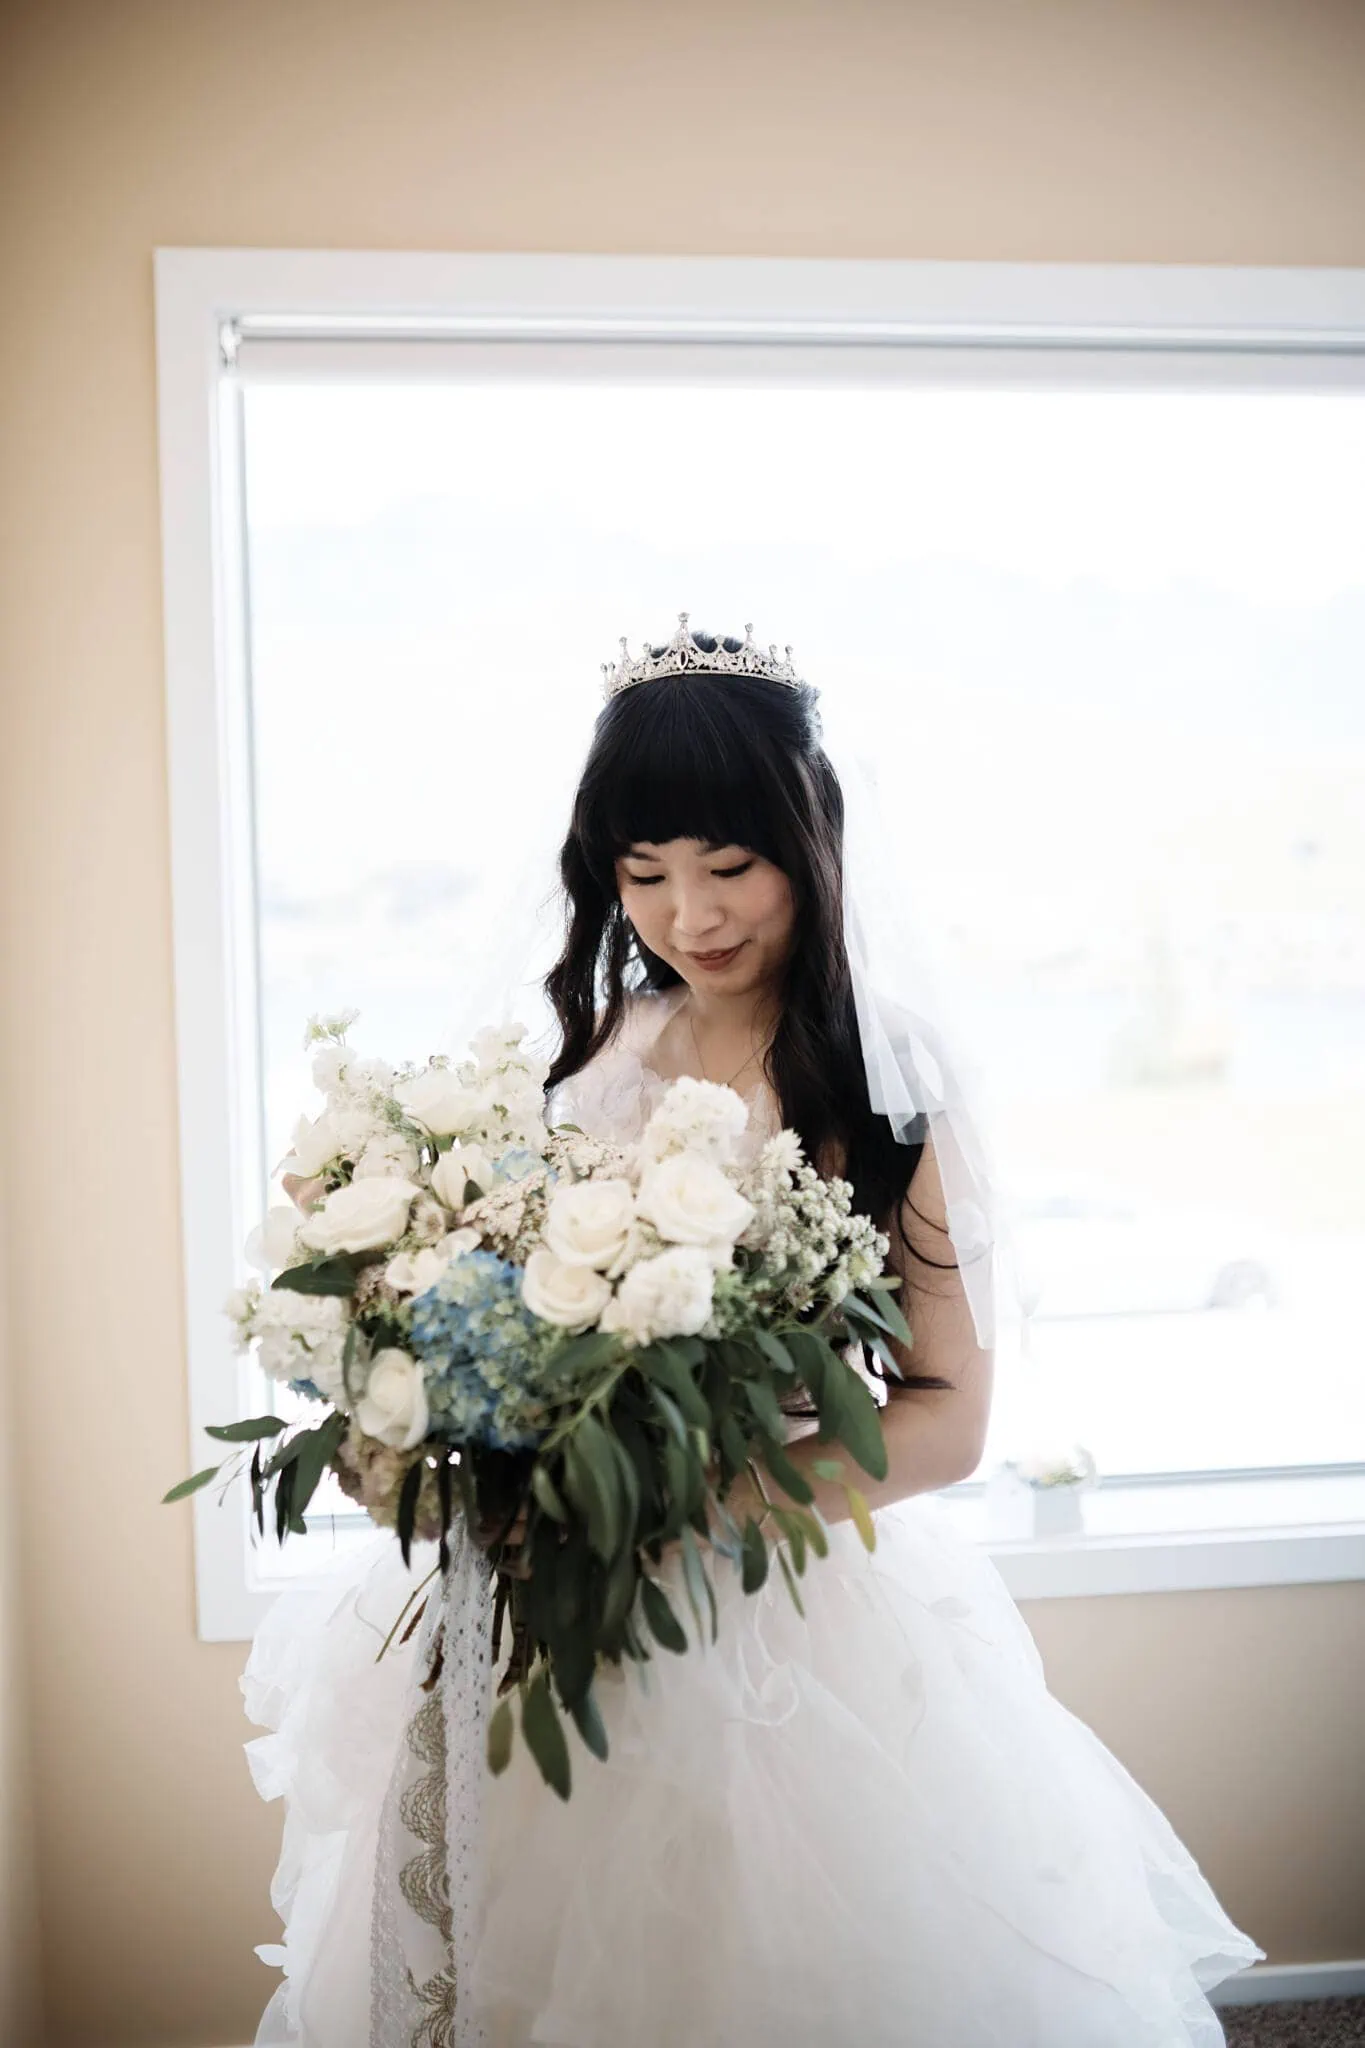 Intimate wedding ceremony with Carlos and Wanzhu at Cecil Peak, featuring a bride holding a bouquet in front of a window.